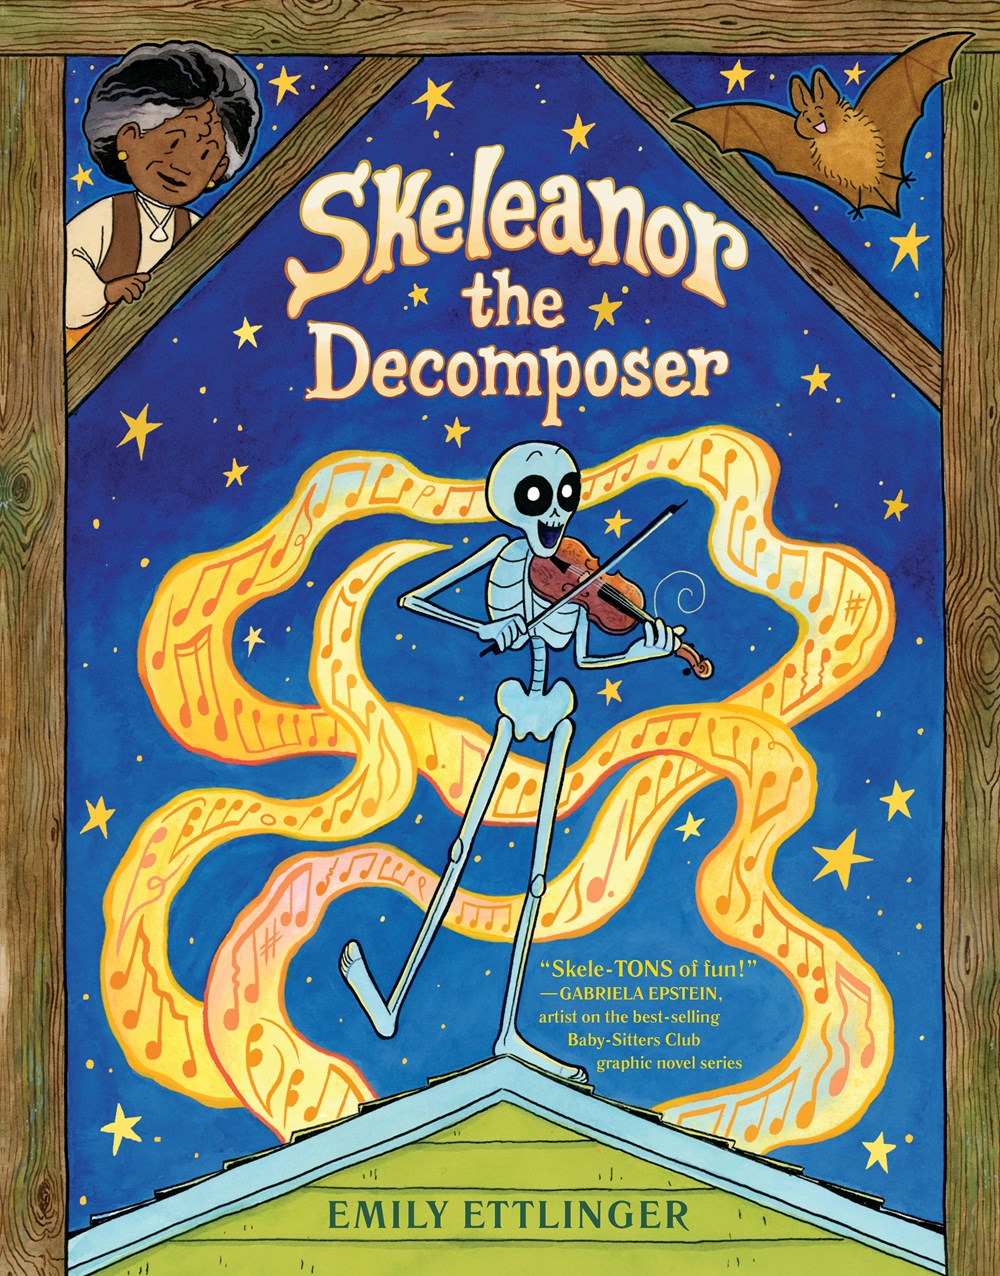 Cover of Skeleanor the Decomposer by Ettlinger